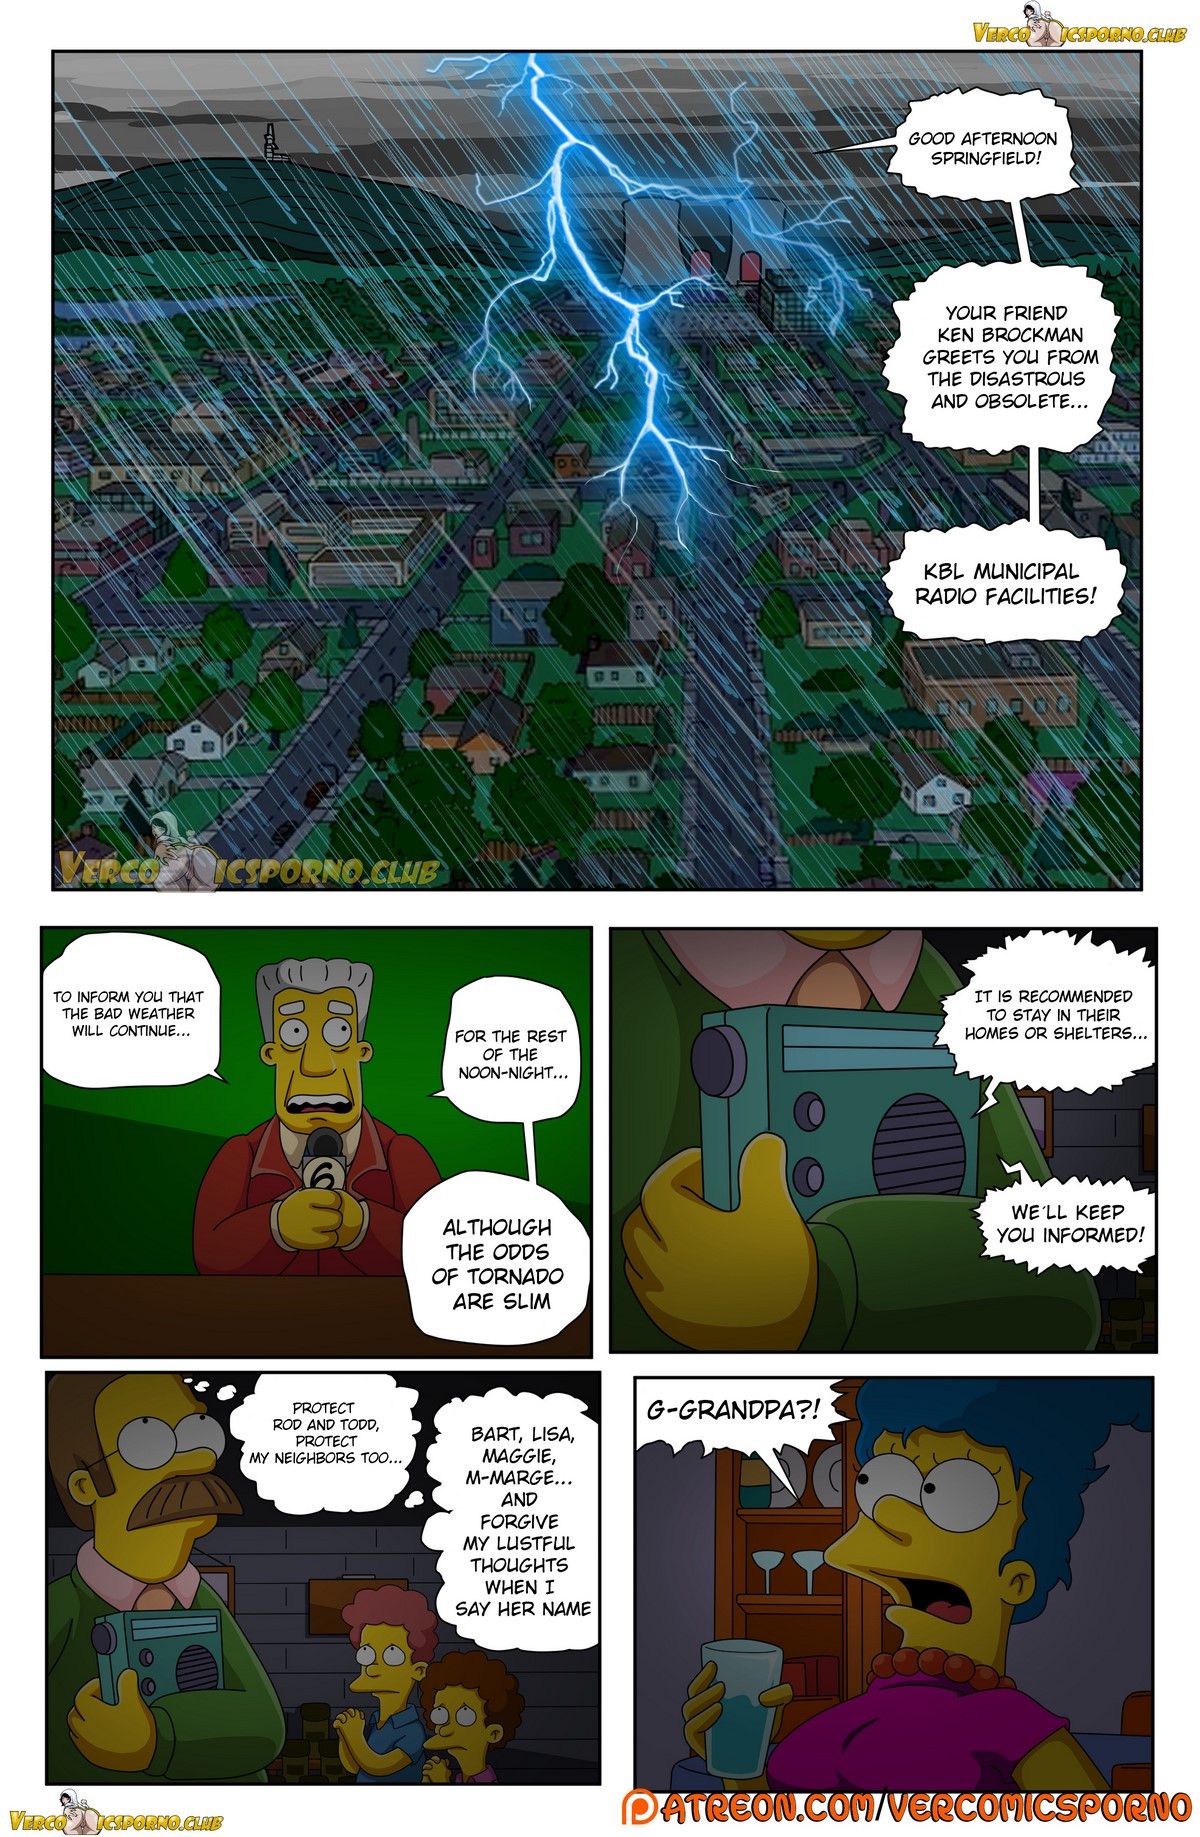 Grandpa and me - [Itooneaxxx] - [Drah Navlag] - [VCP] - [The Simpsons] 62